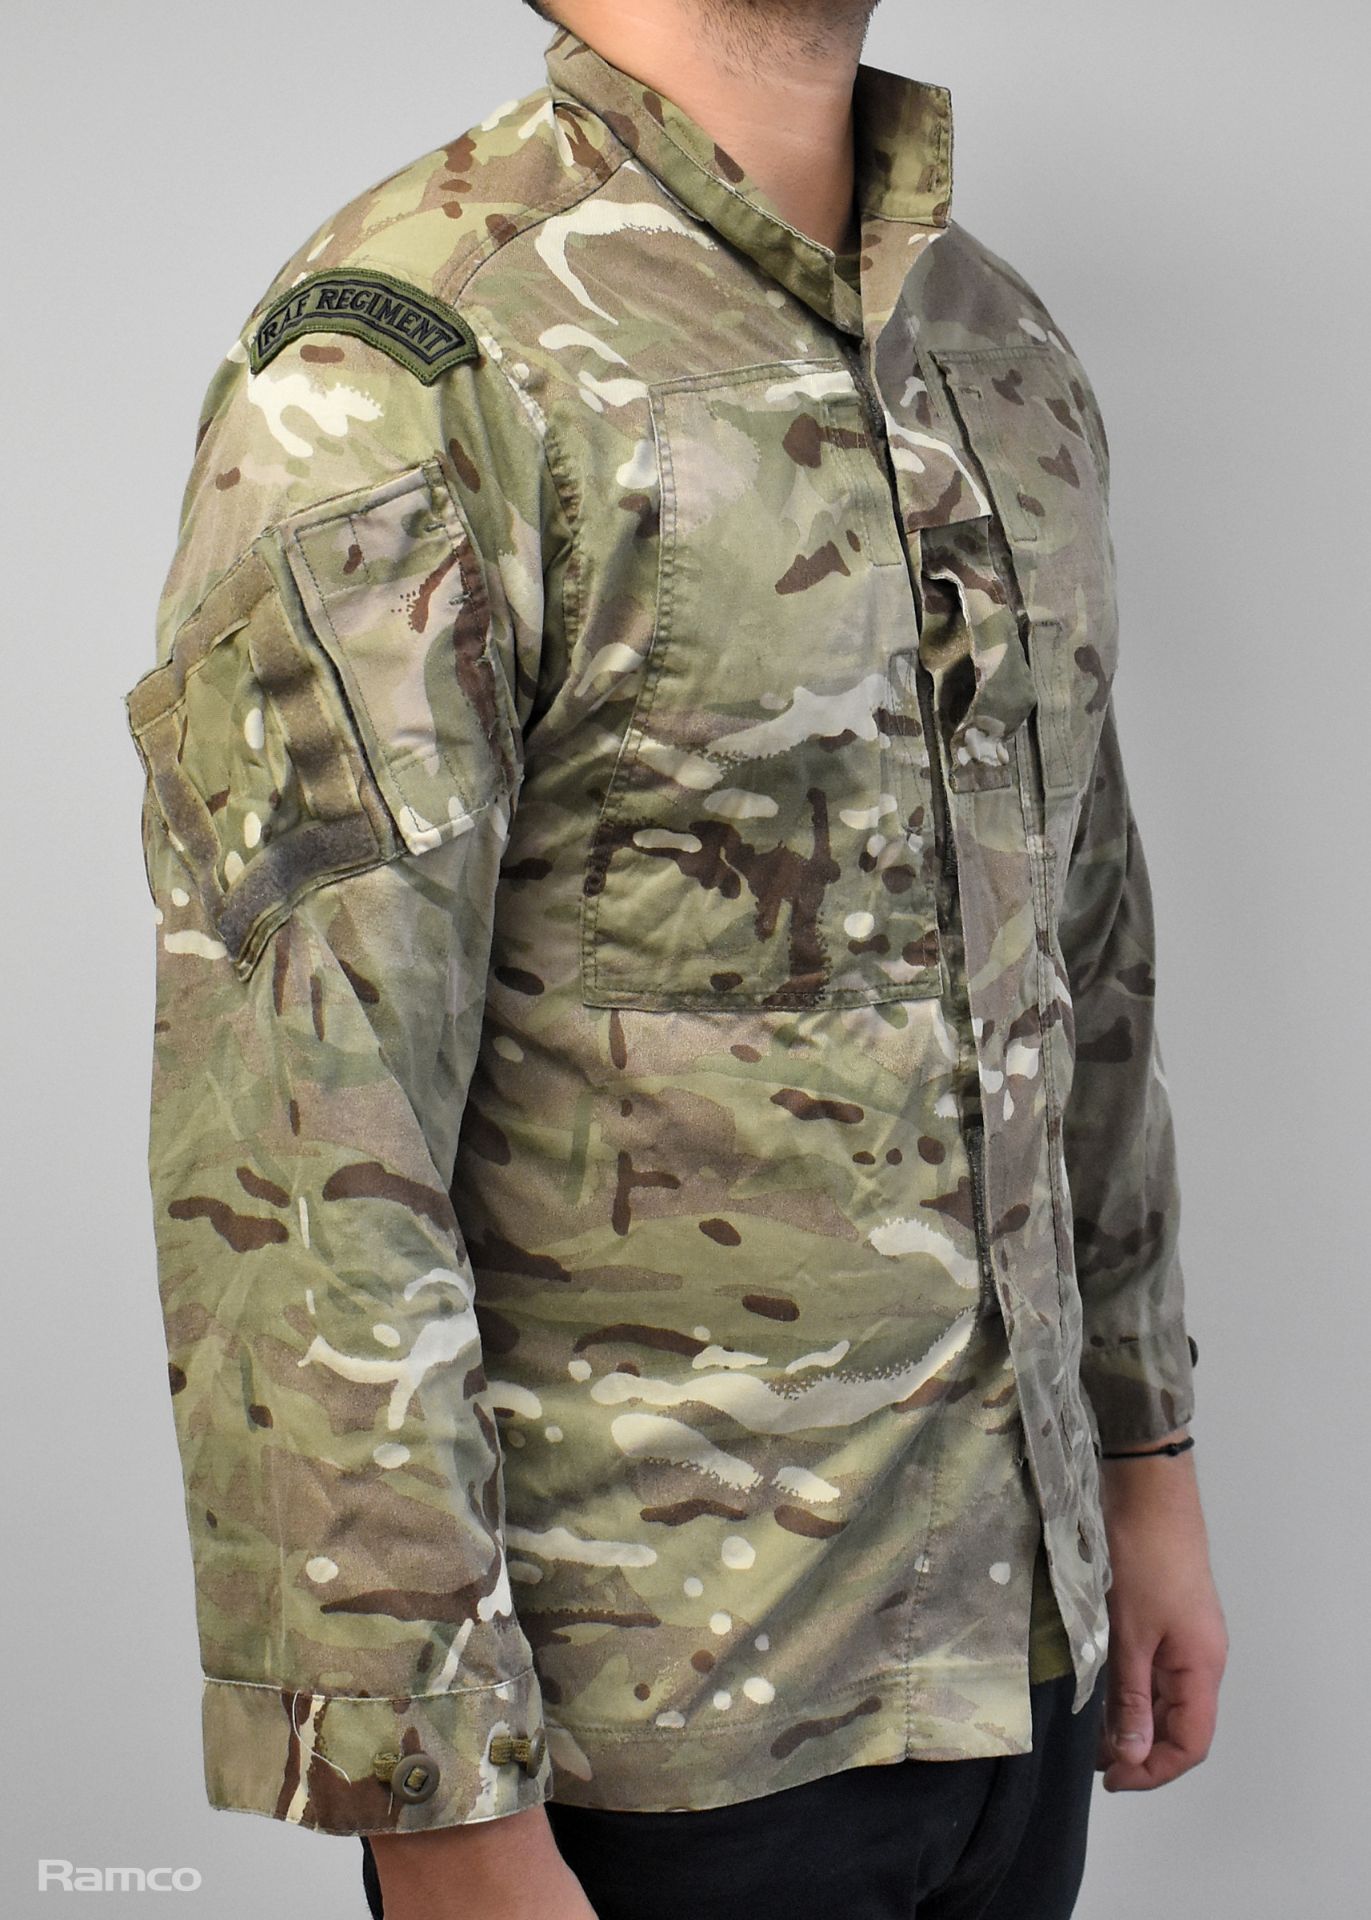 100x British Army MTP Combat jackets mixed styles - mixed grades and sizes - Image 4 of 16